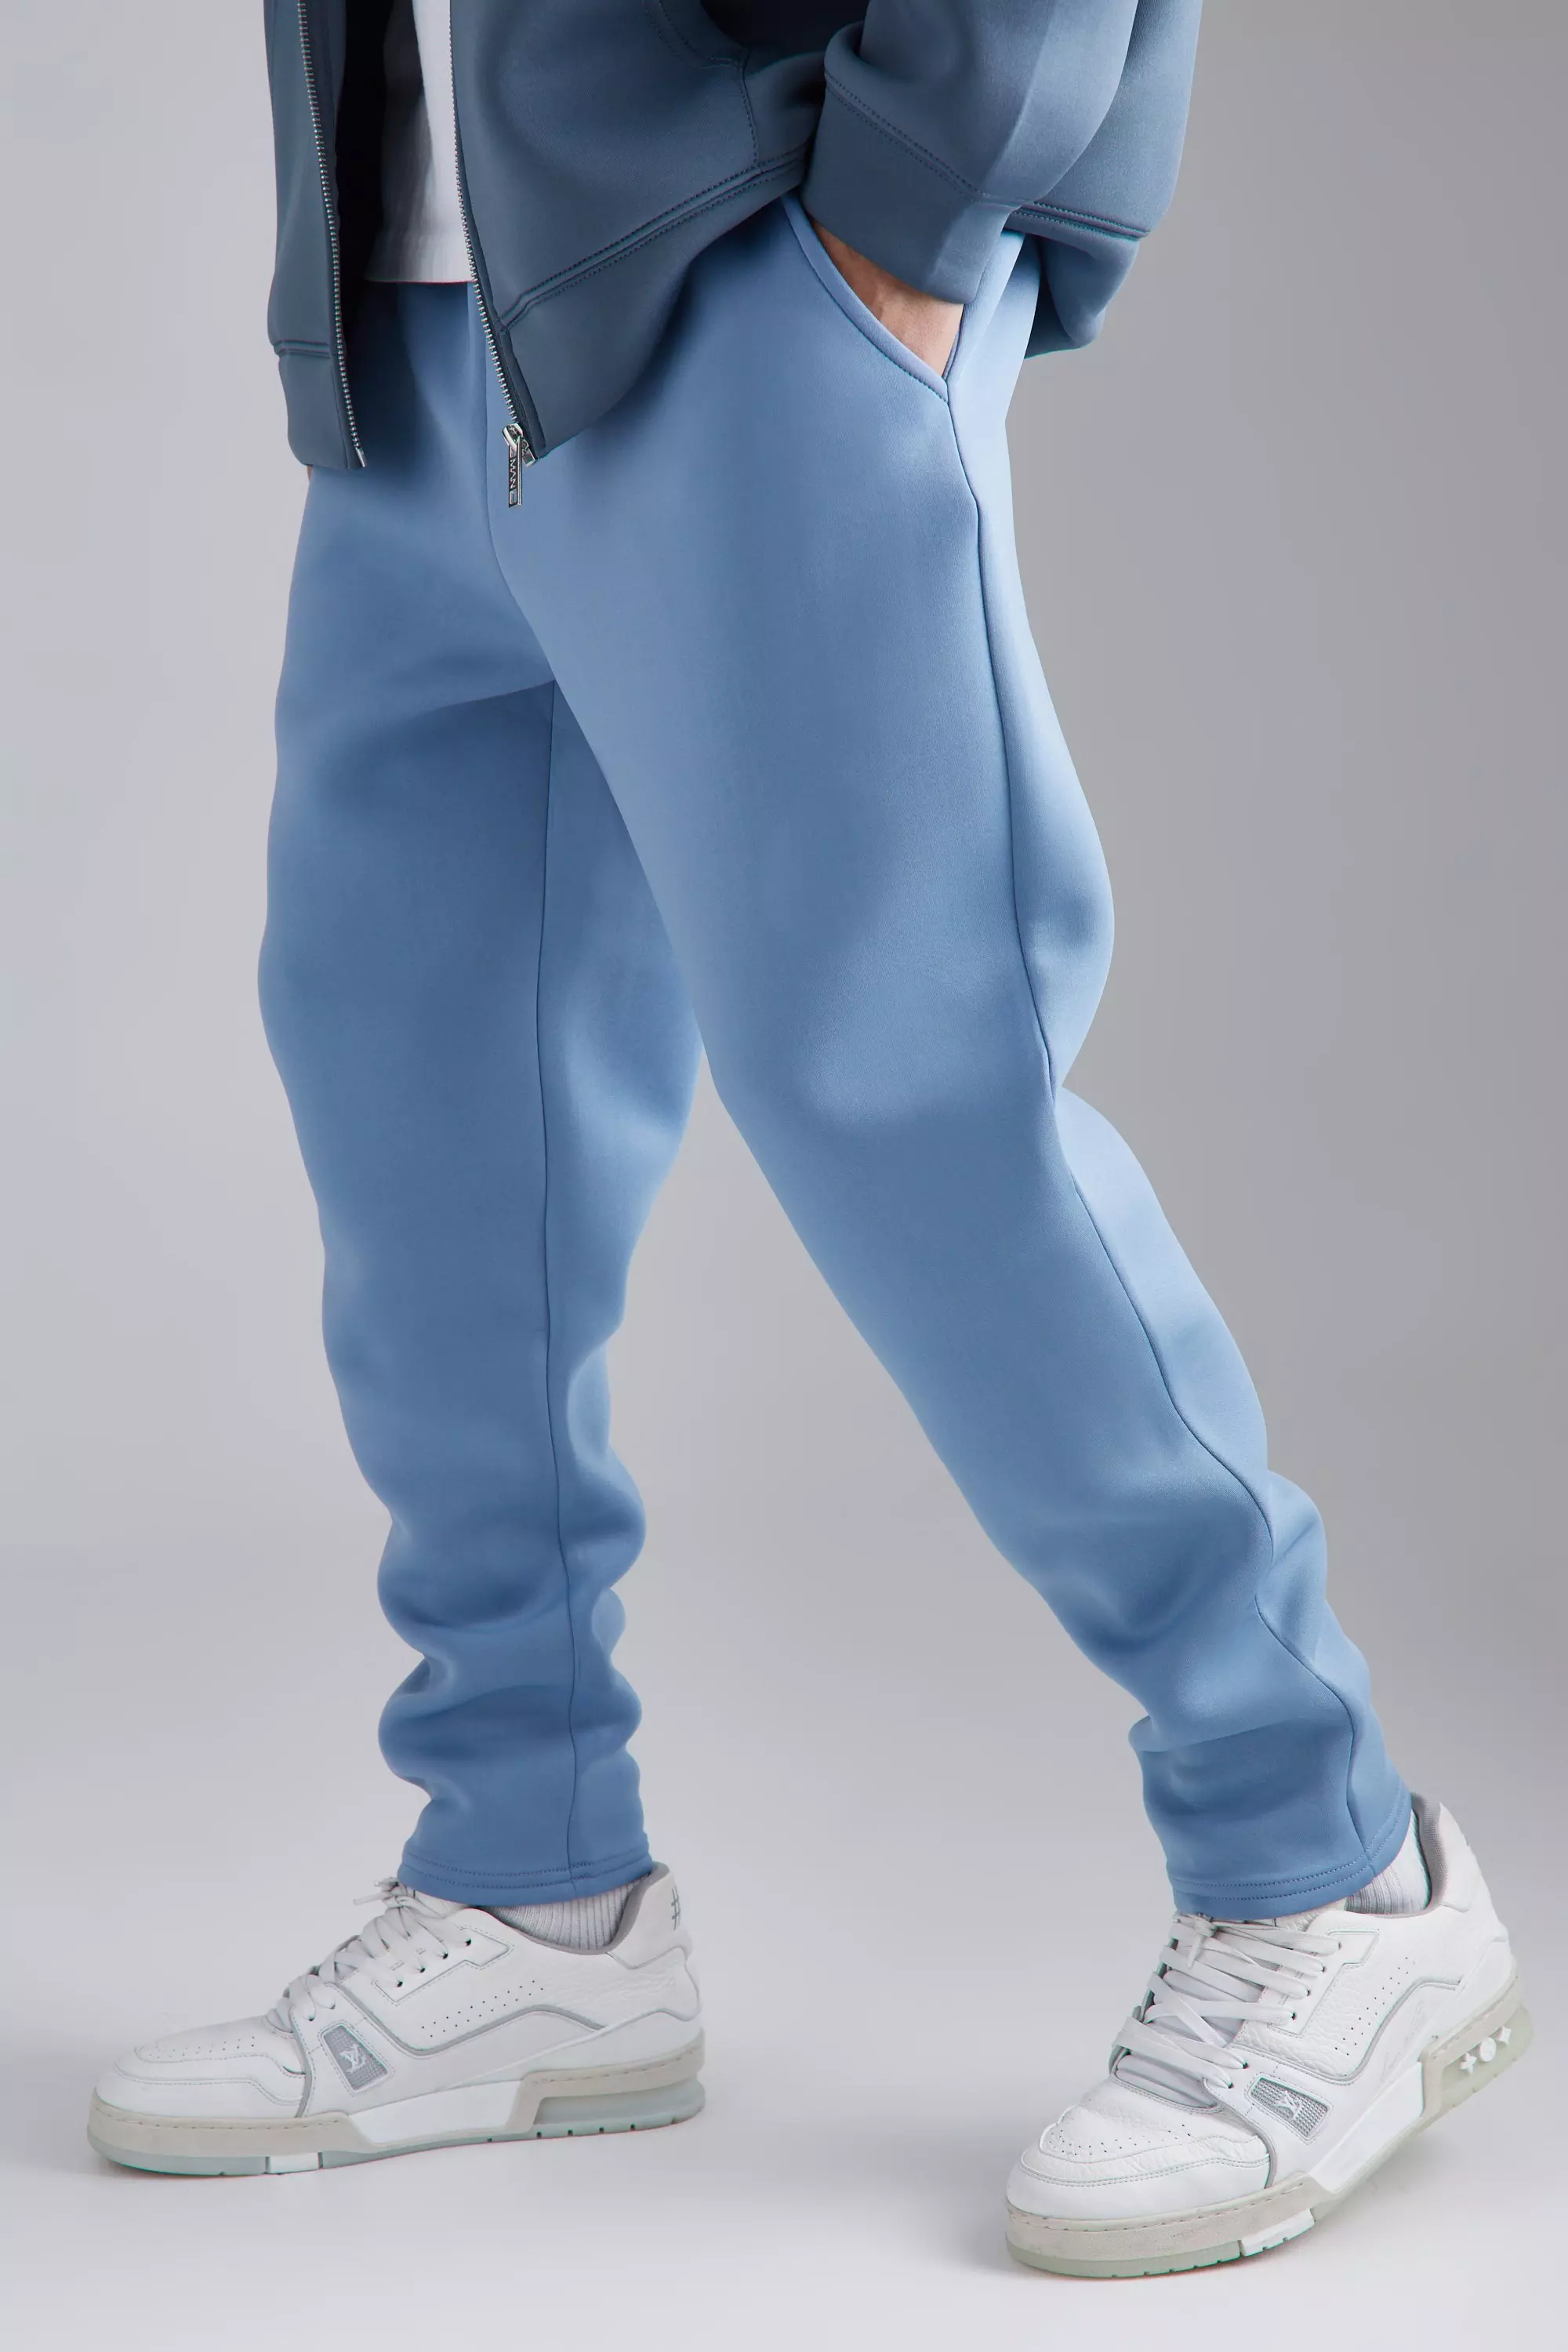 Blue Sigma Tapered Sweatsuit Joggers – The King McNeal Collection